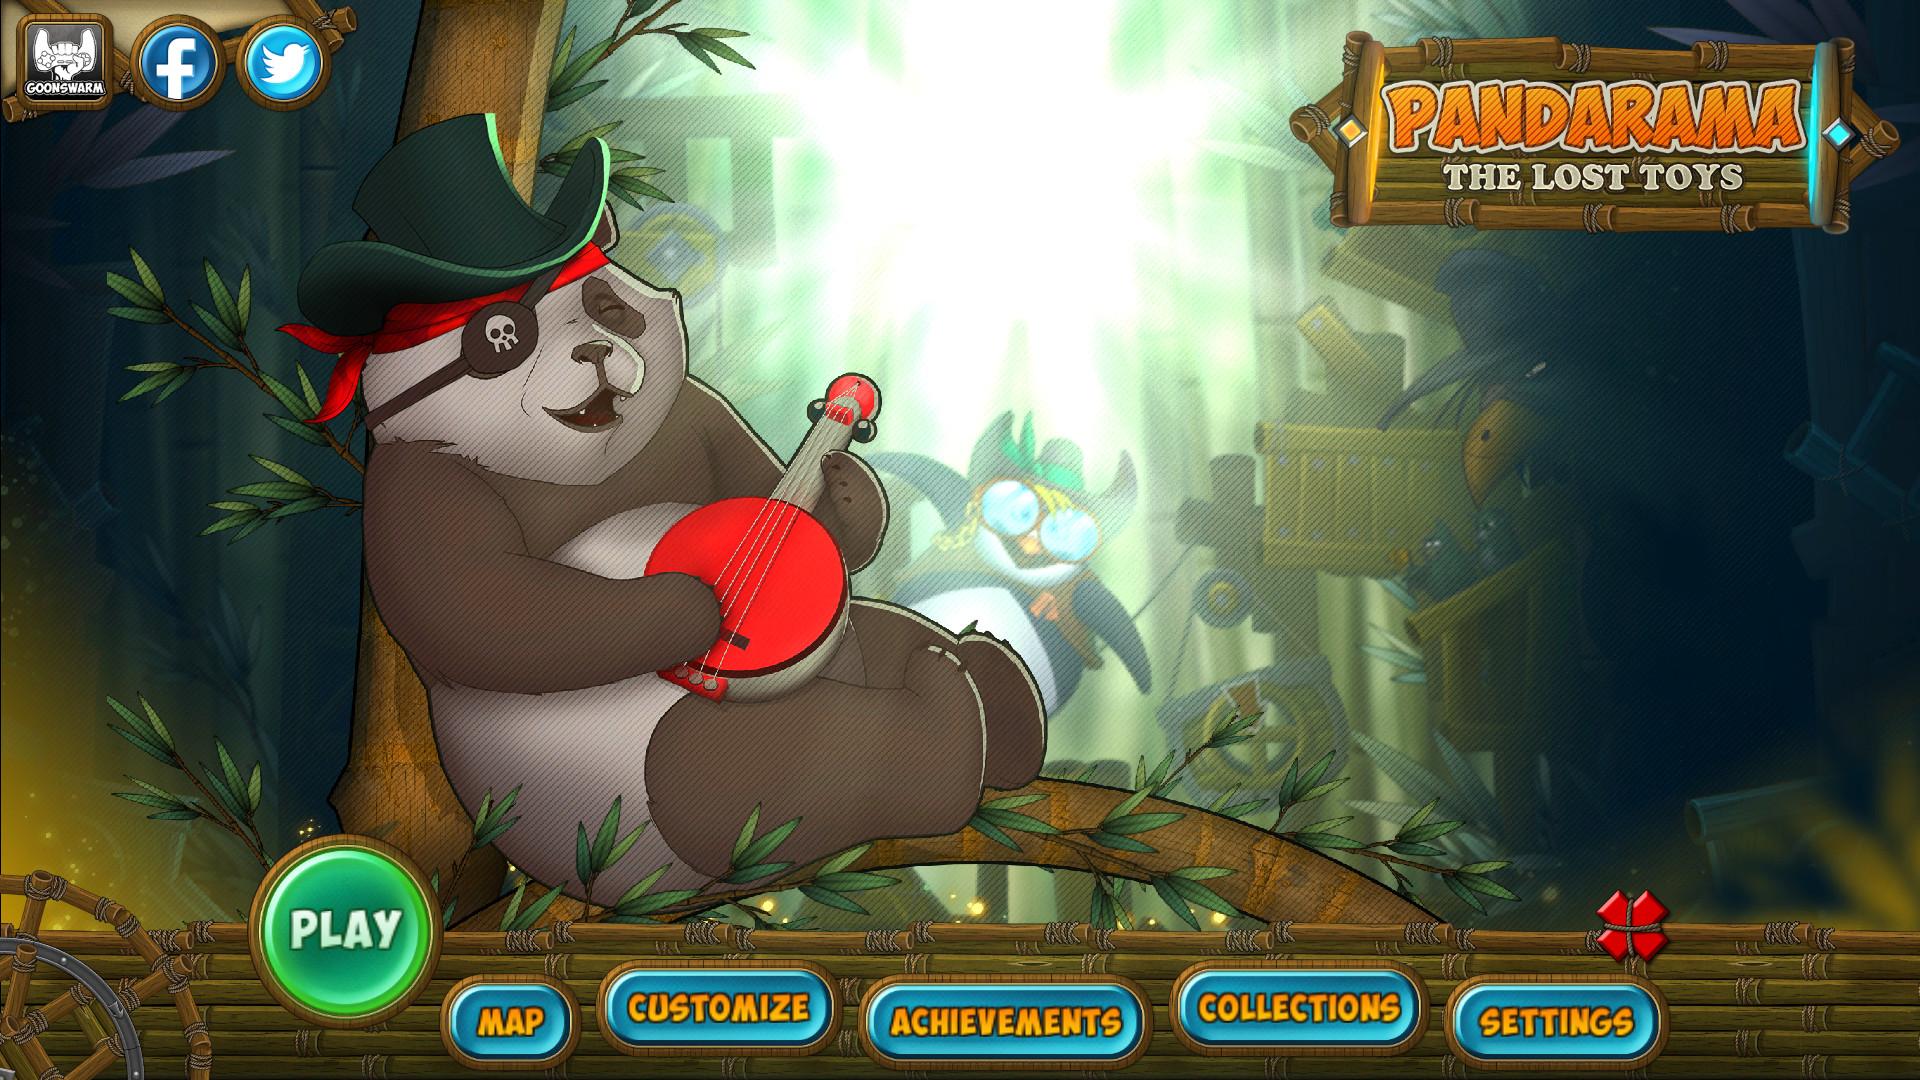 Screenshot №1 from game Pandarama: The Lost Toys